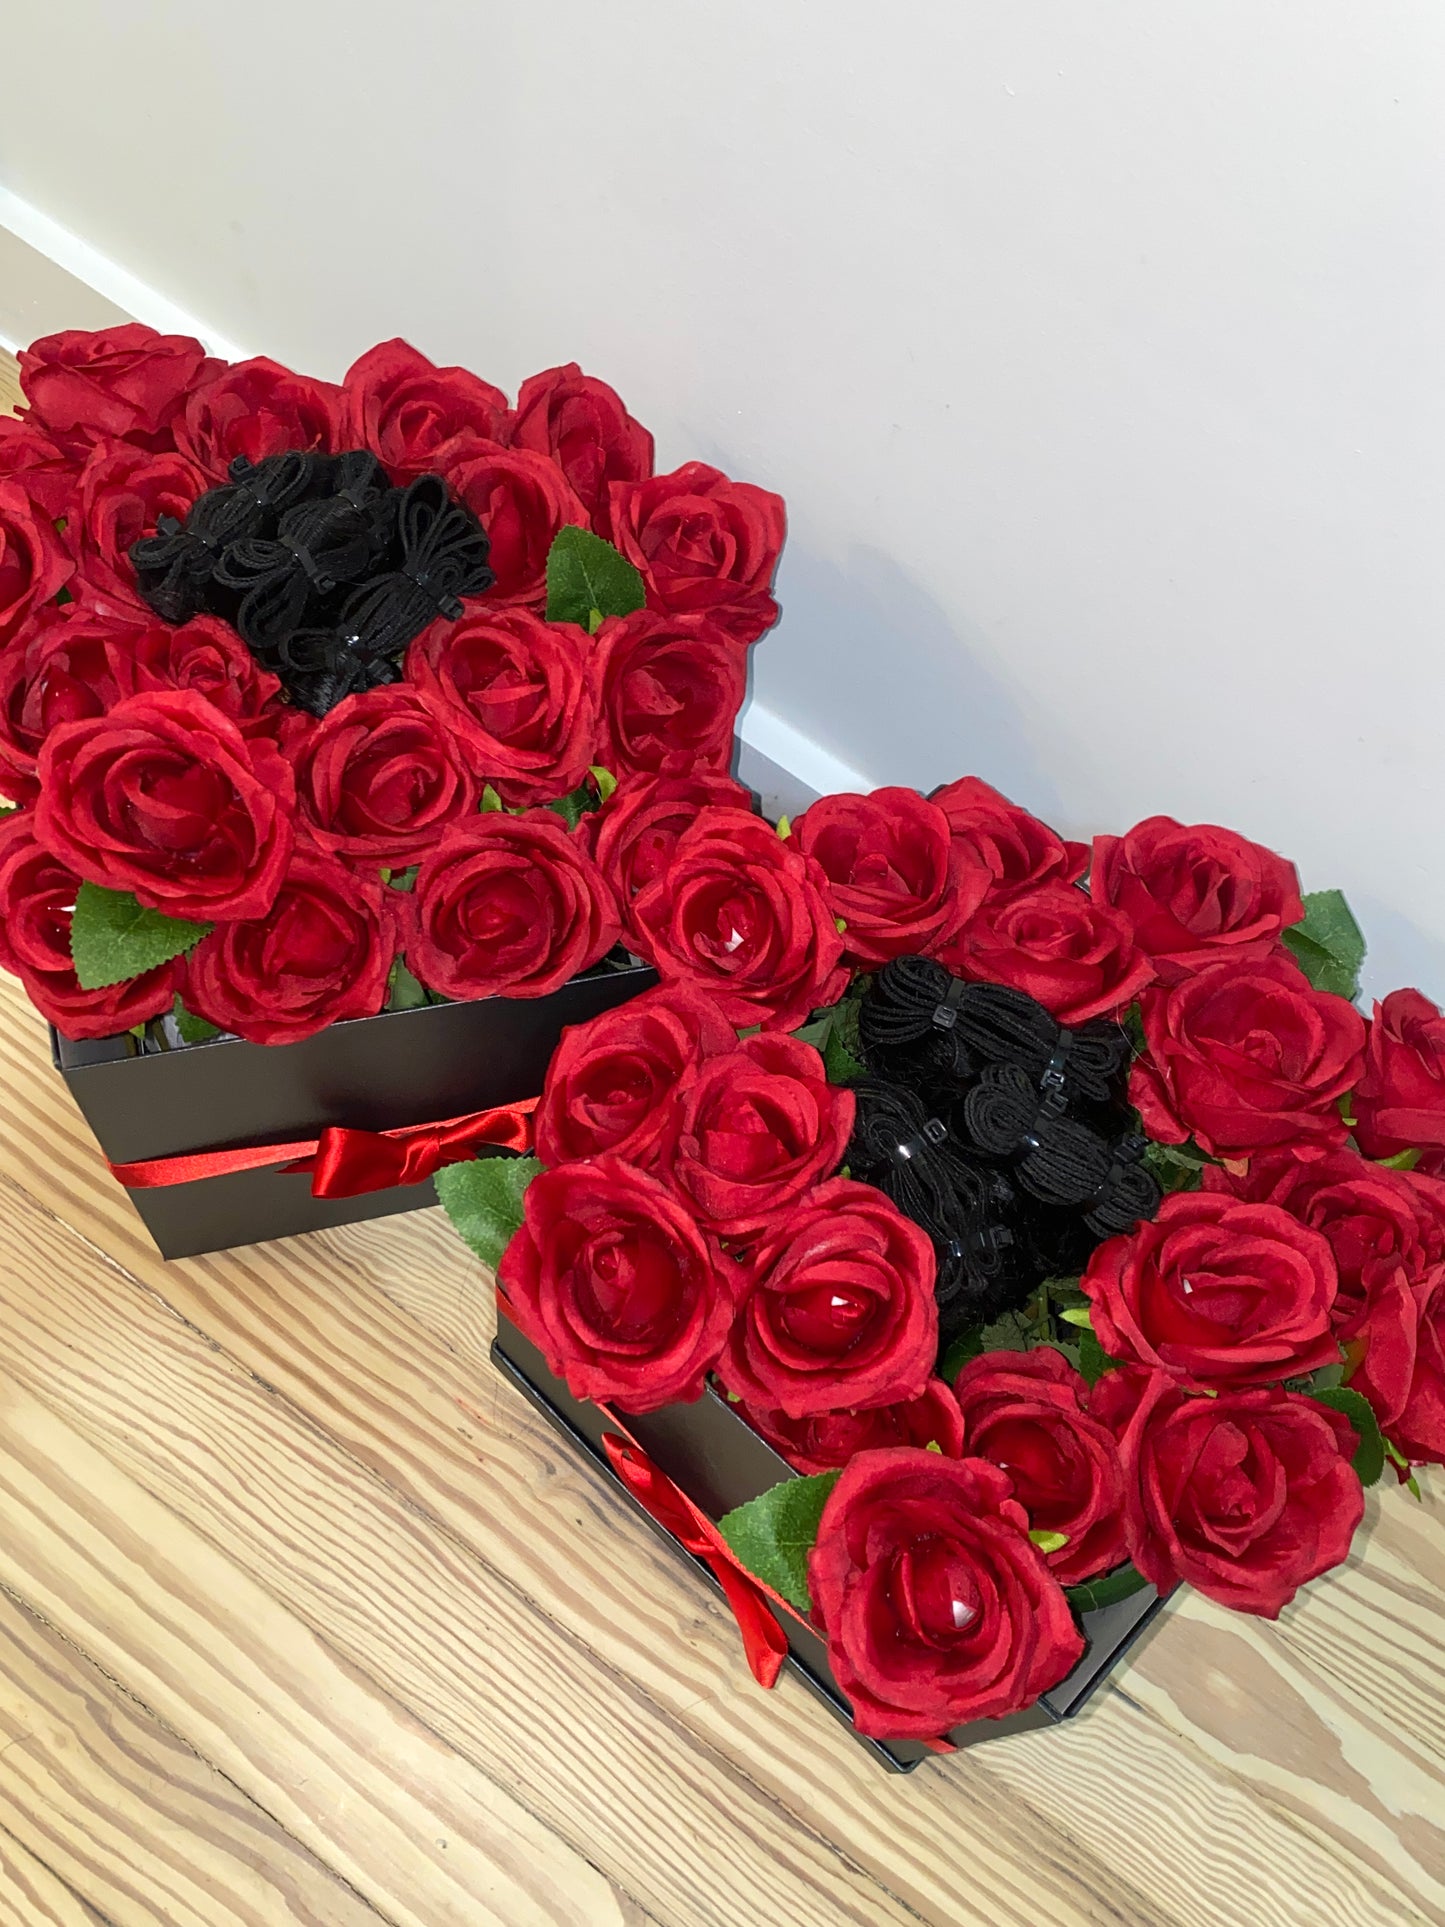 Valentine’s Day | Hair & Roses in a box